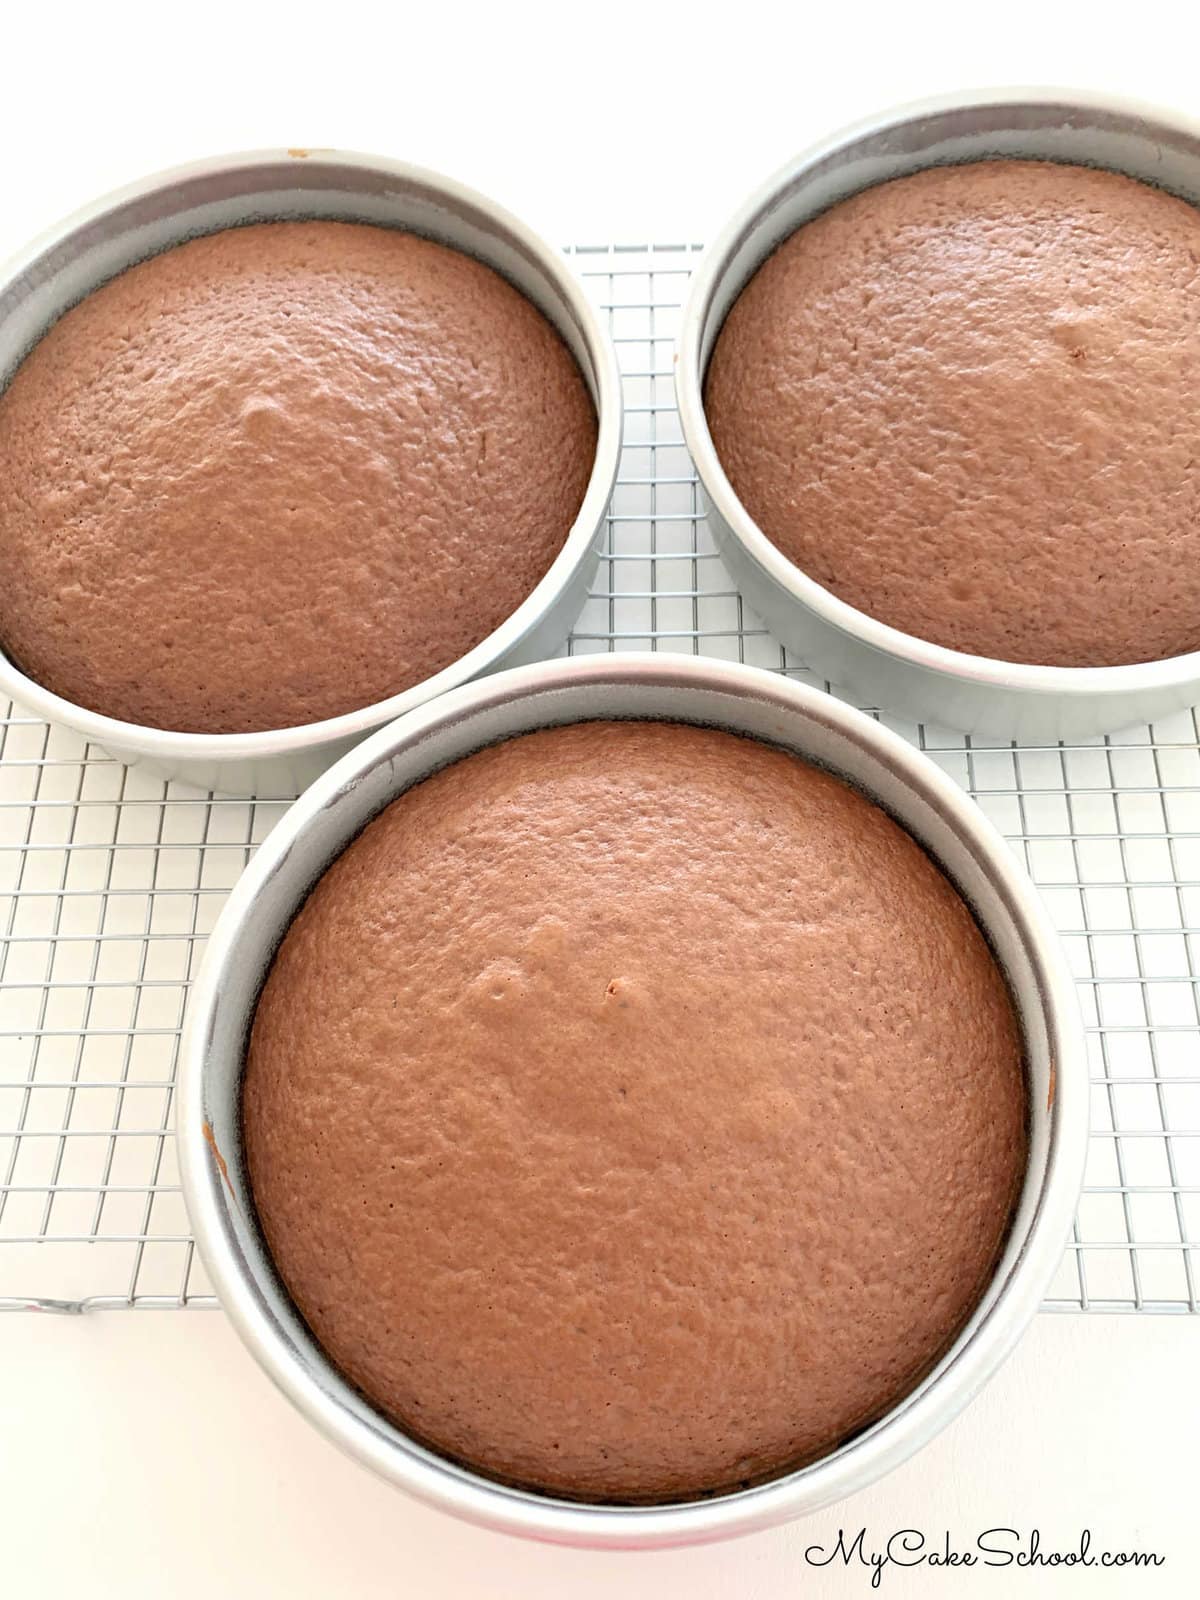 Three baked German Chocolate Cake Layers, cooling in pans